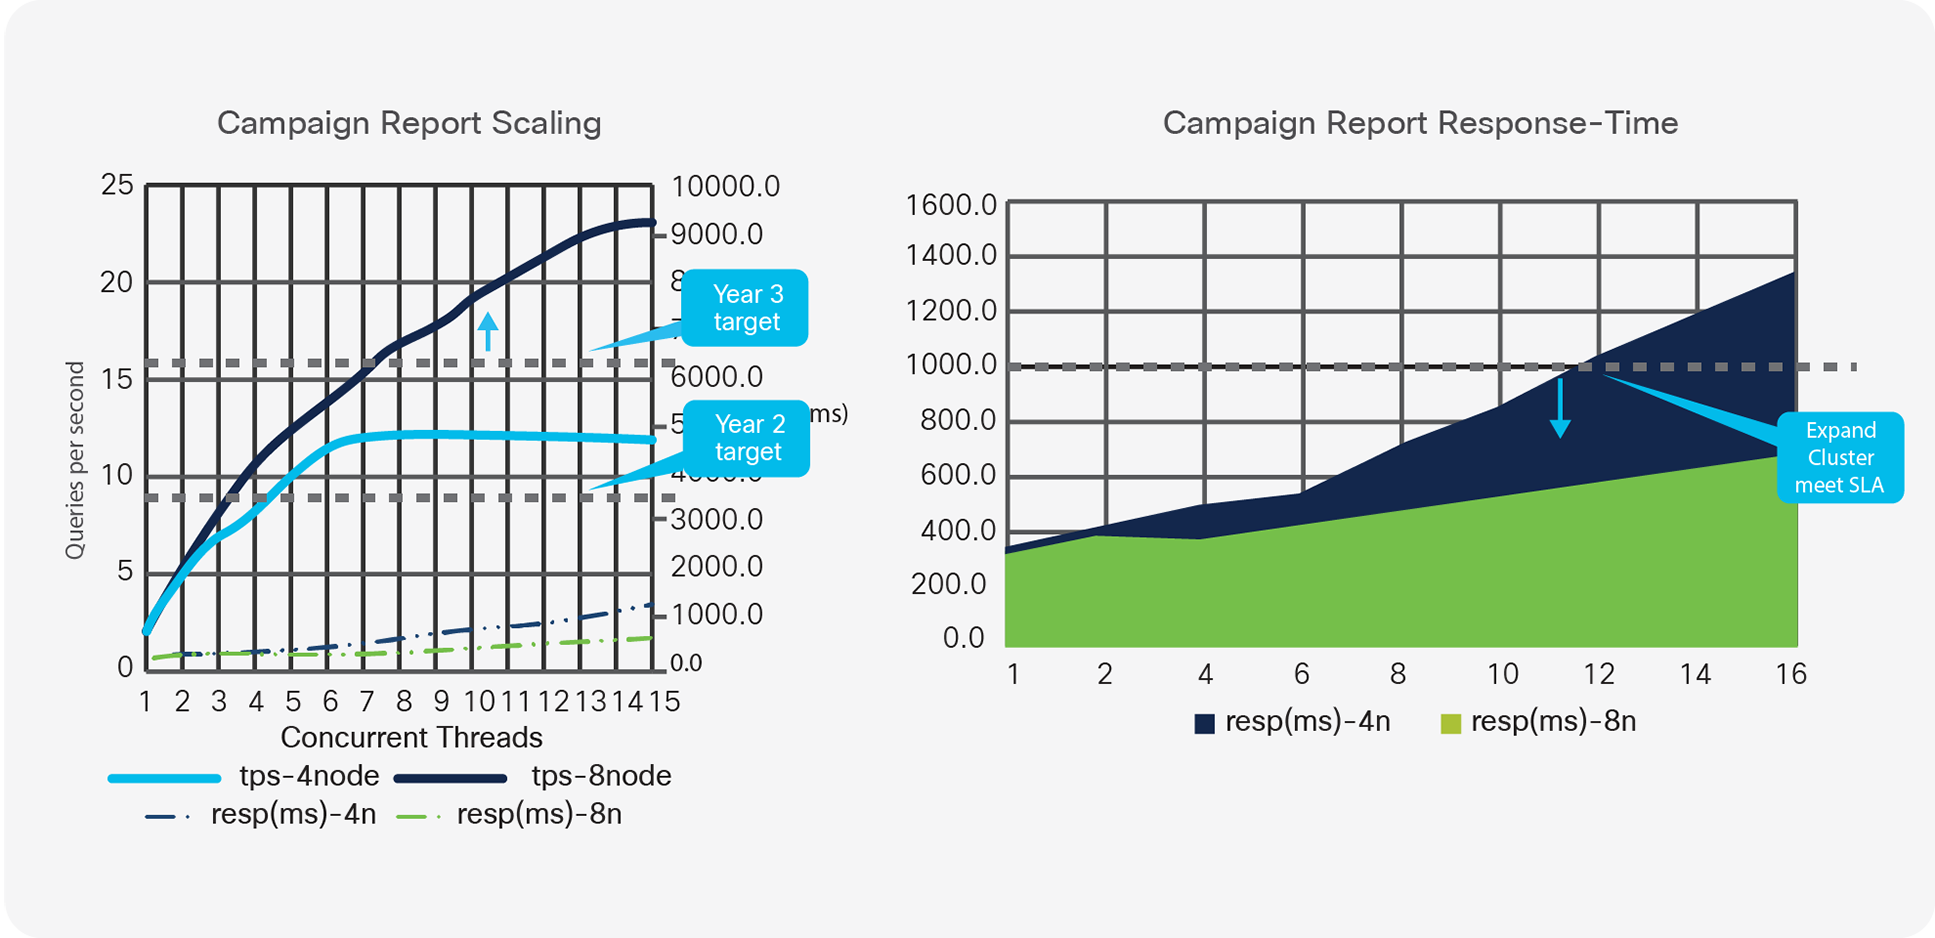 Campaign Report Scaling (Left) and Campaign Report Response Time (Right)